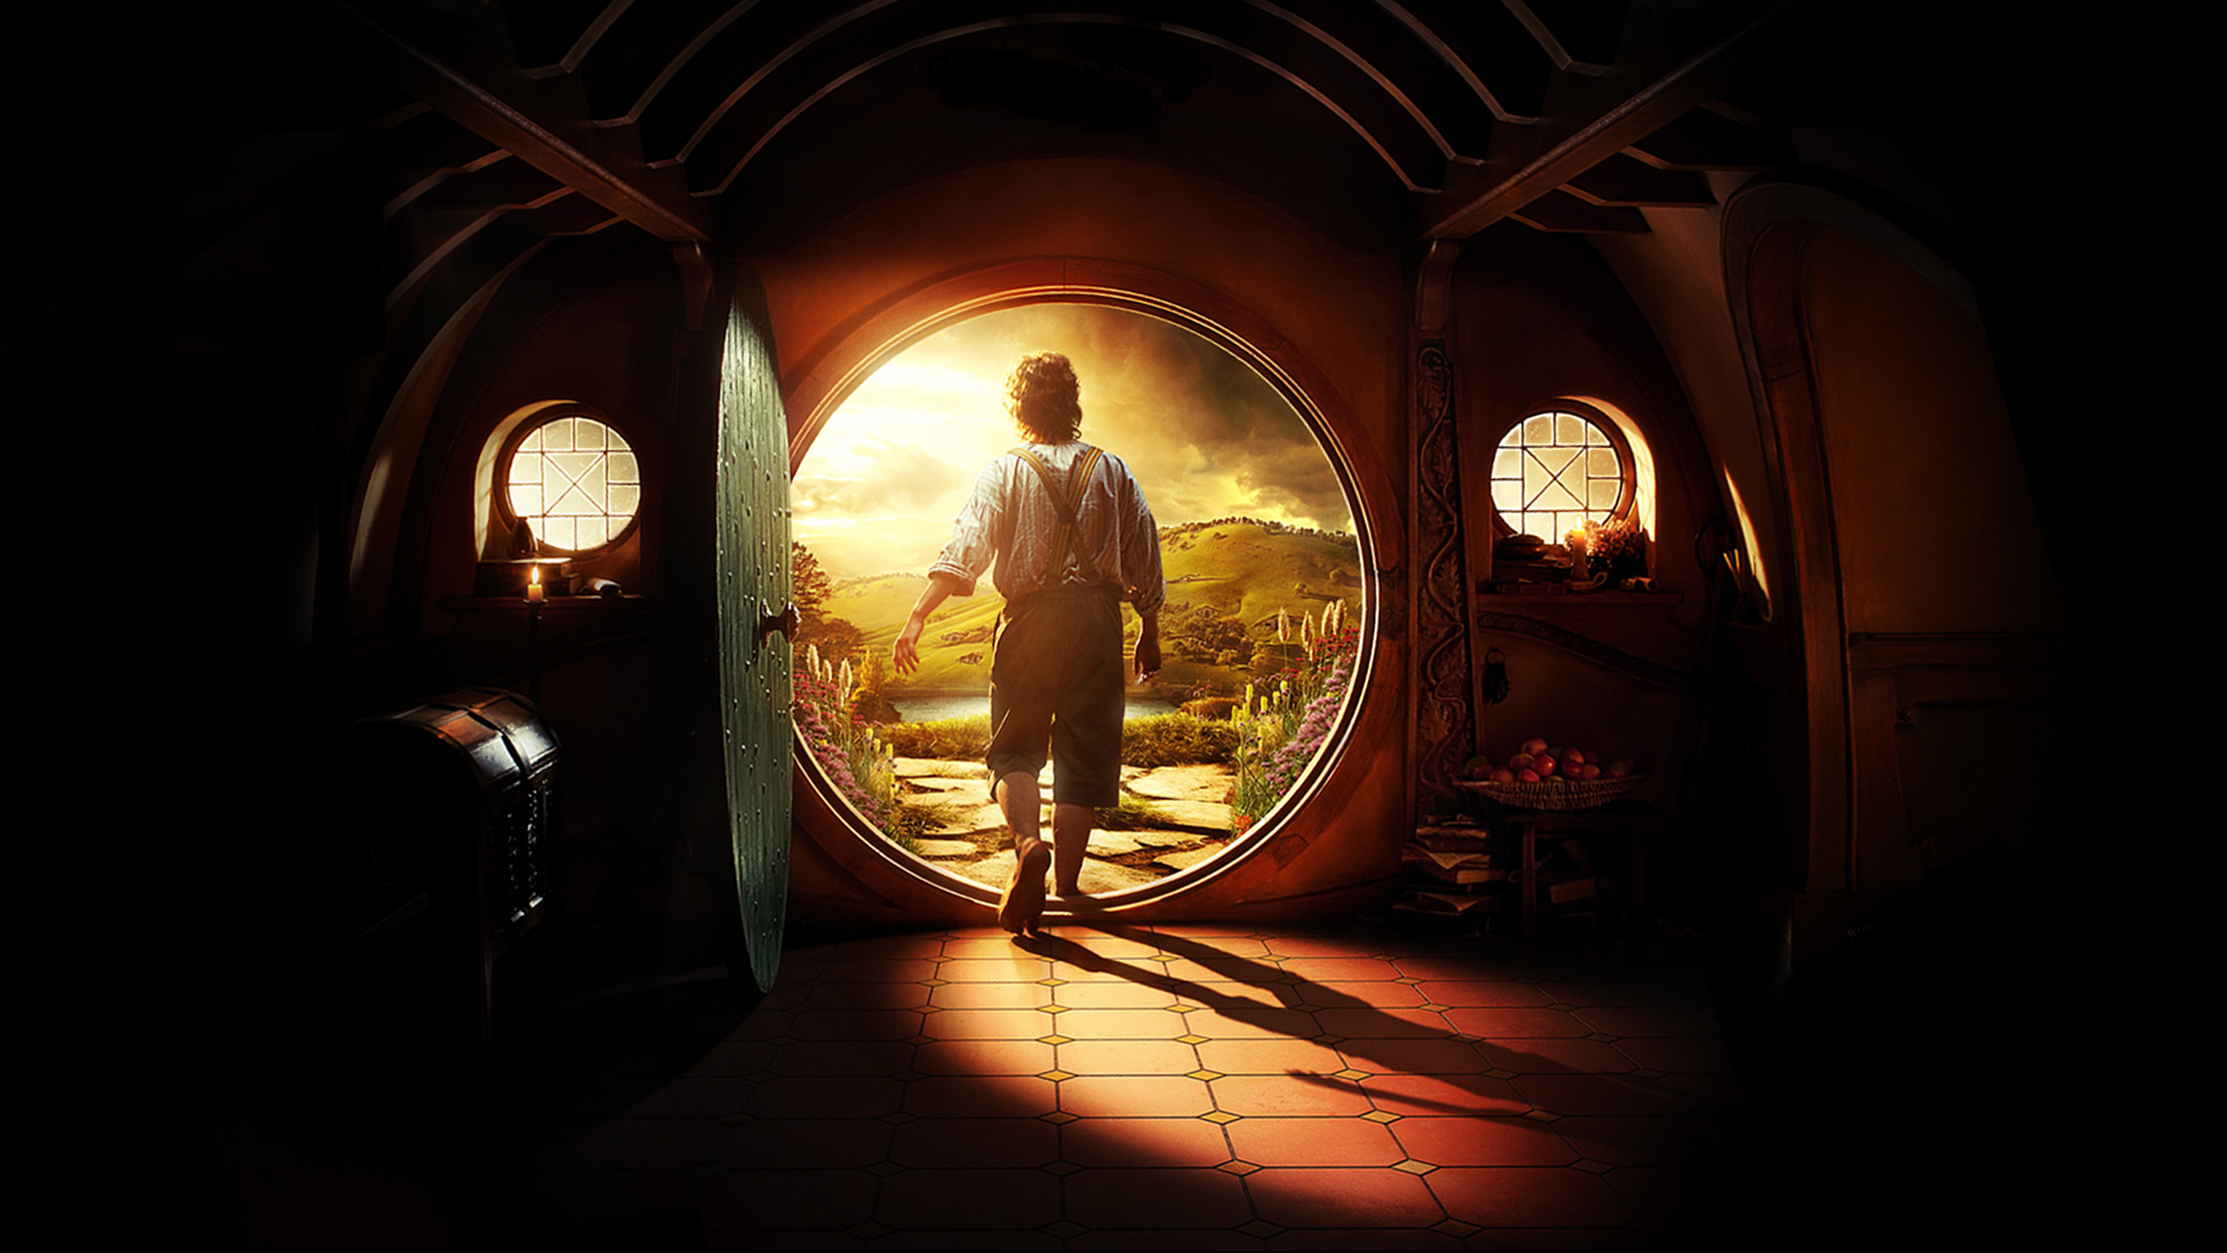 The Hobbit Movie Wallpapers Awesome Wallpapers 2227x1253